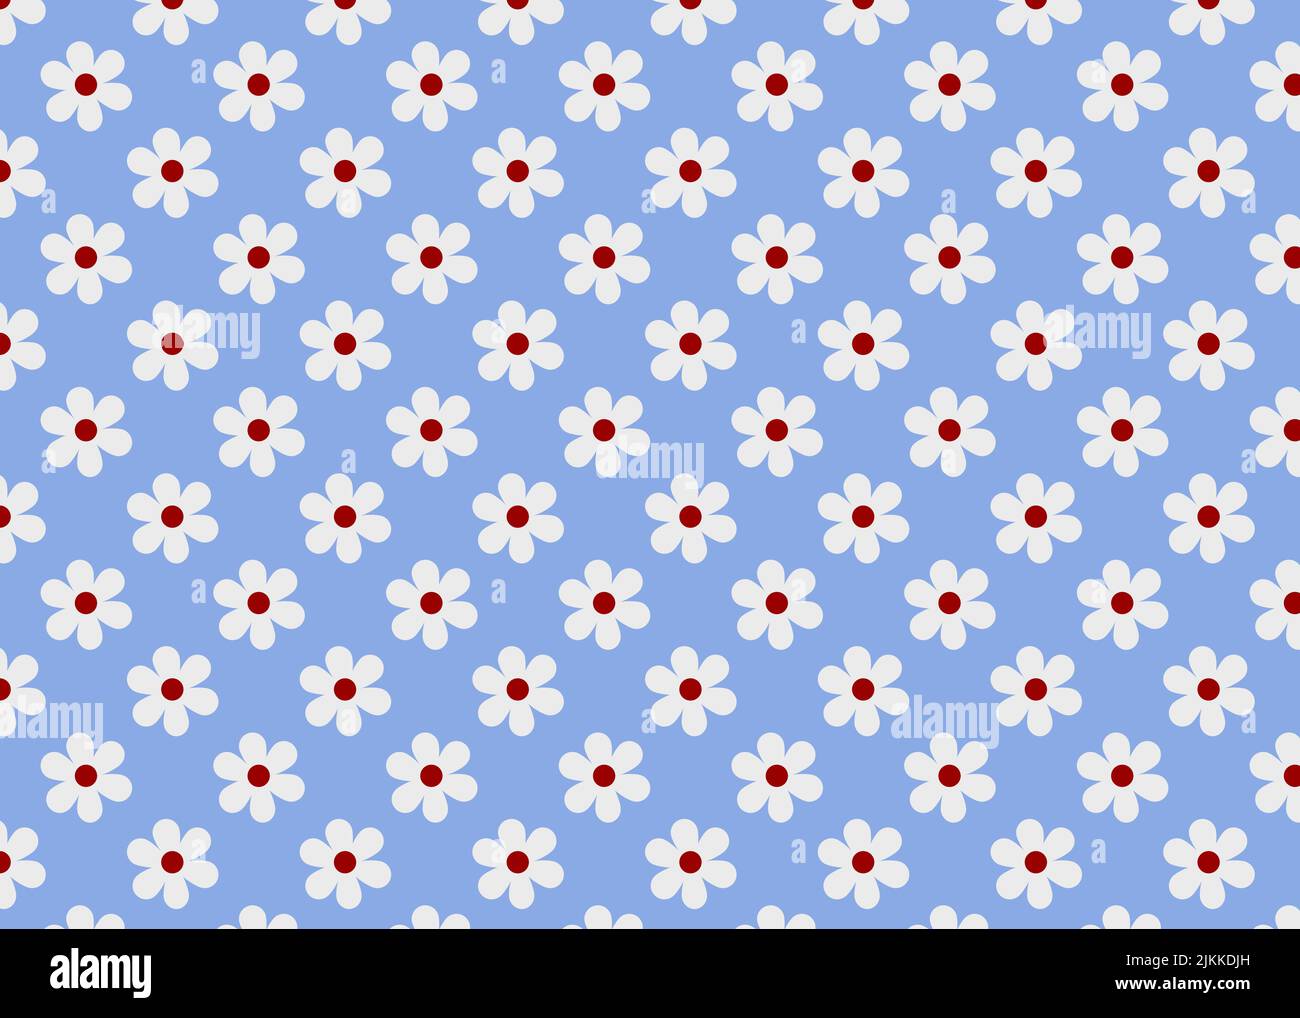 The seamless white flowers with red dot patterns on a blue background Stock Photo